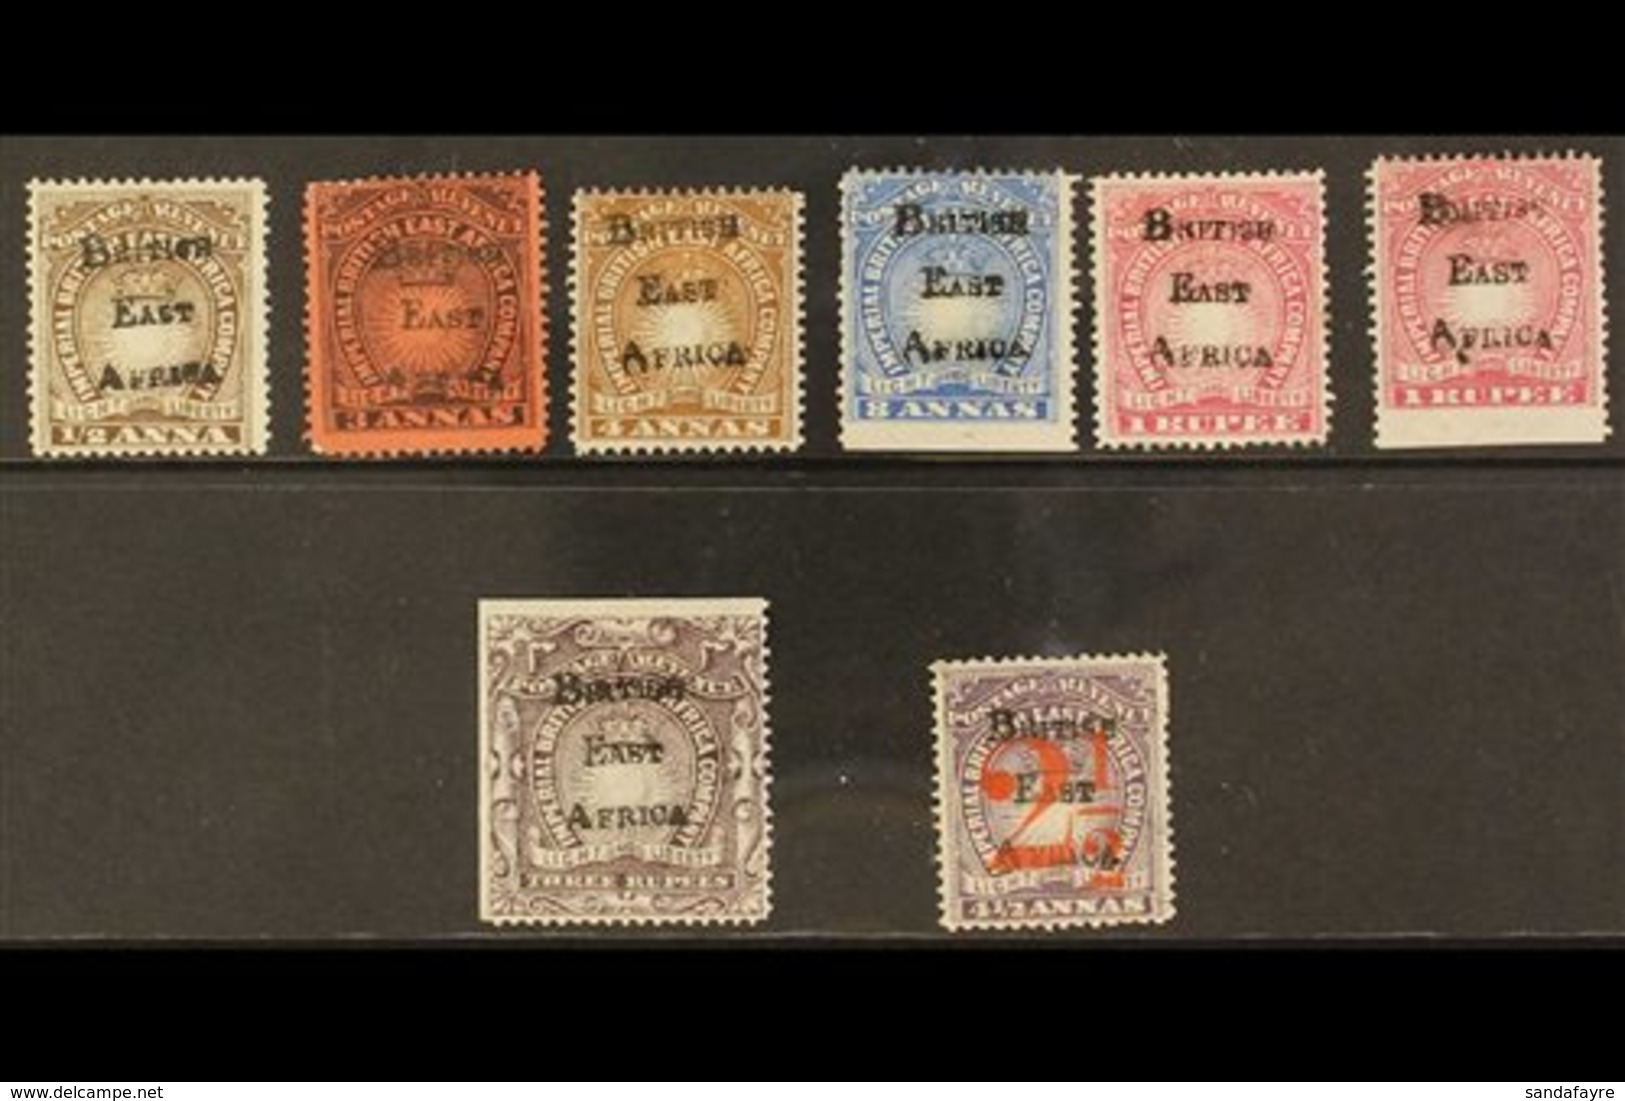 1895 "BRITISH EAST AFRICA" HANDSTAMPS On "Light And Liberty" Types Of 1890, A Useful Mint Or Unused Group With ½a, 3a, 4 - Britisch-Ostafrika